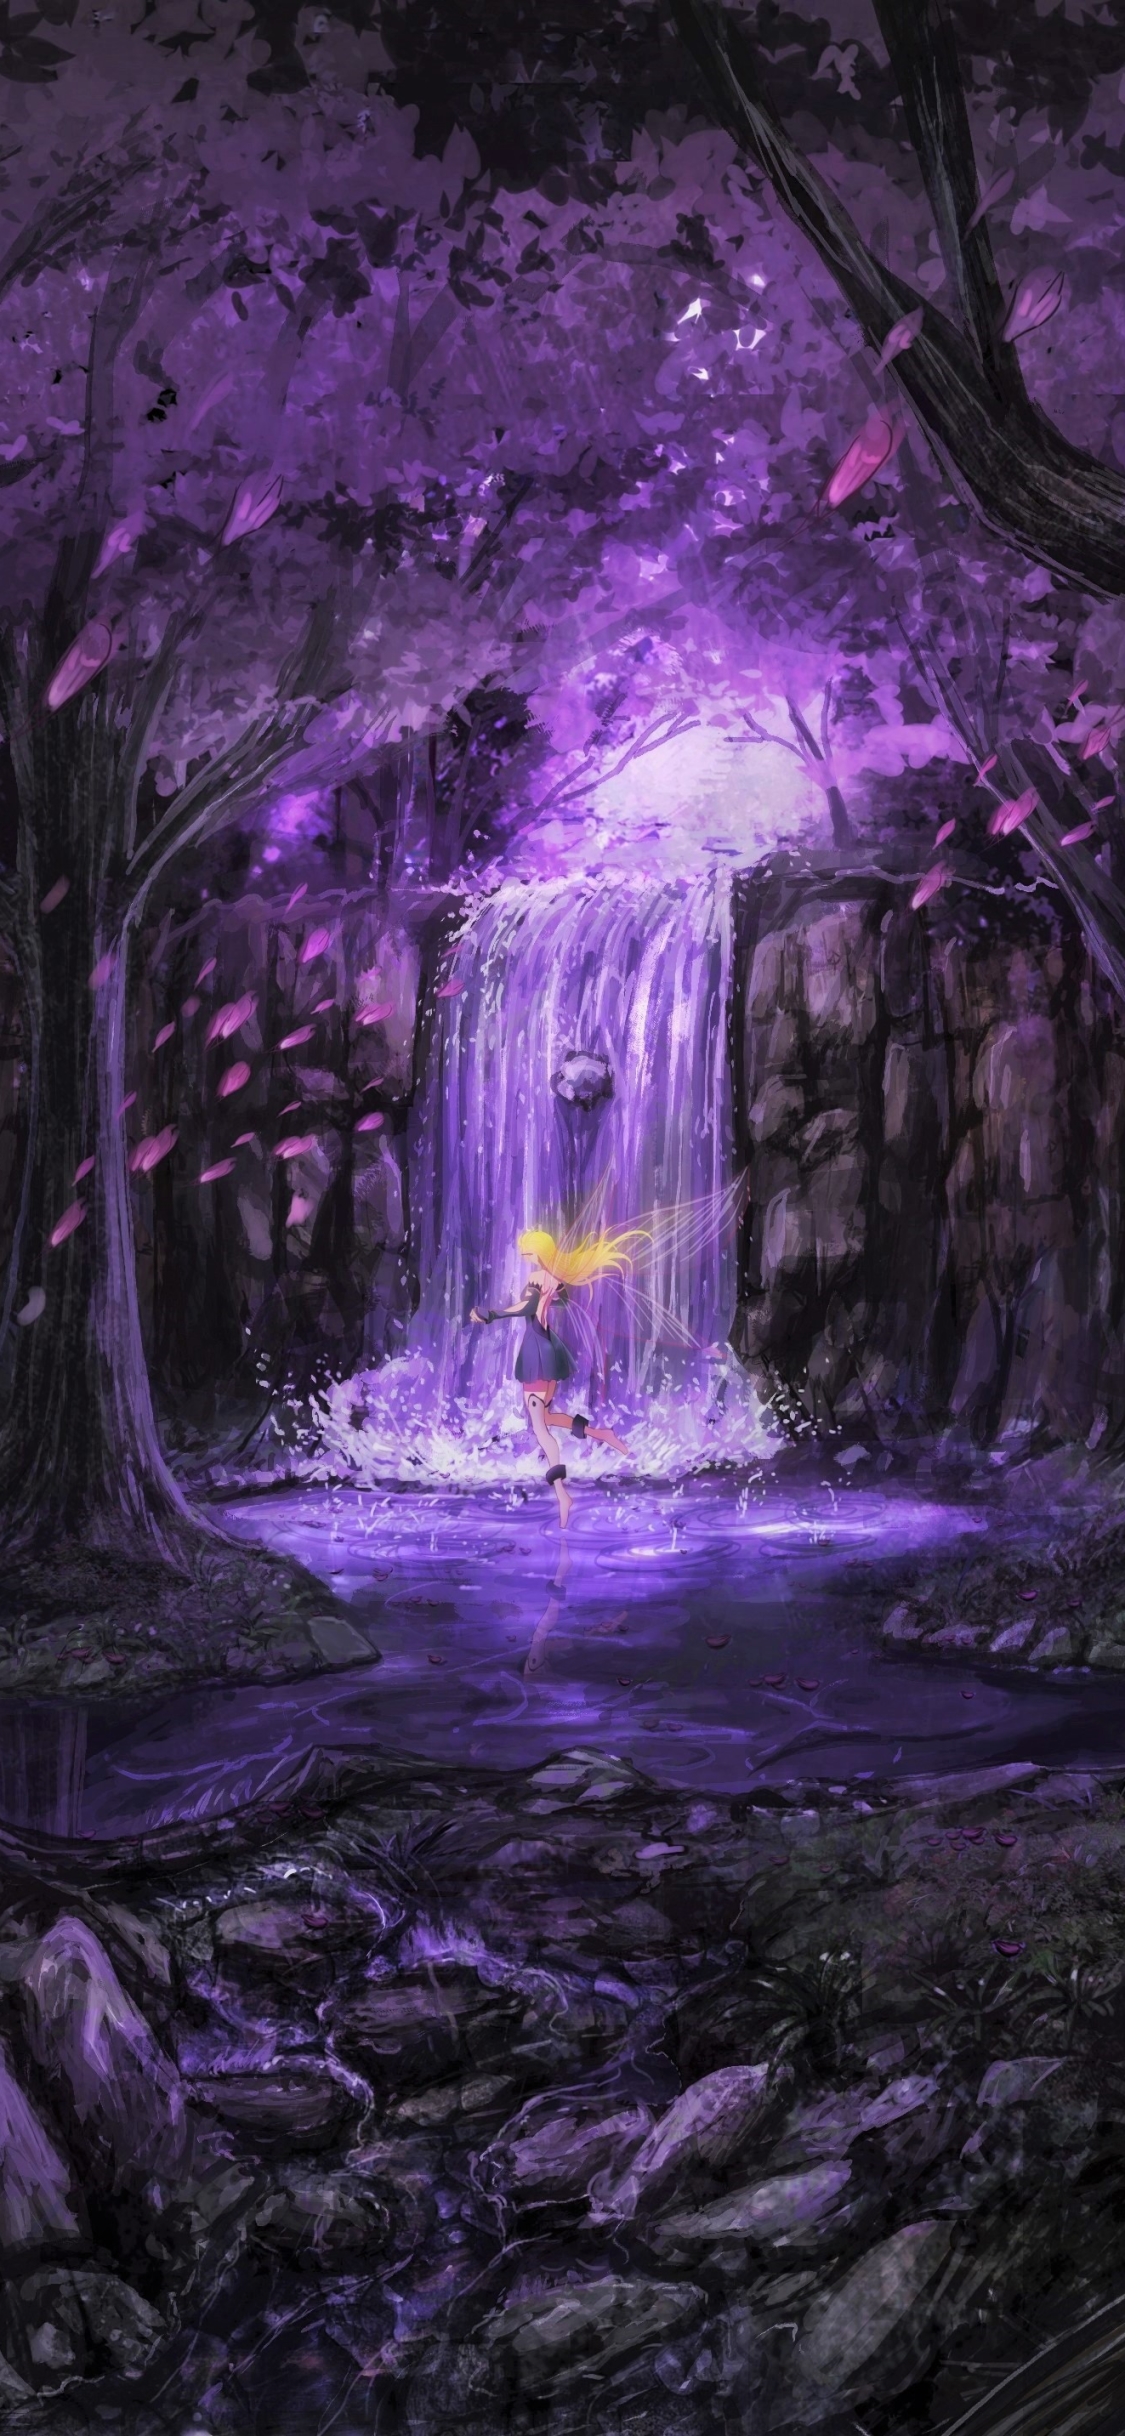 Fairy in Purple Fantasy Forest by そよ風